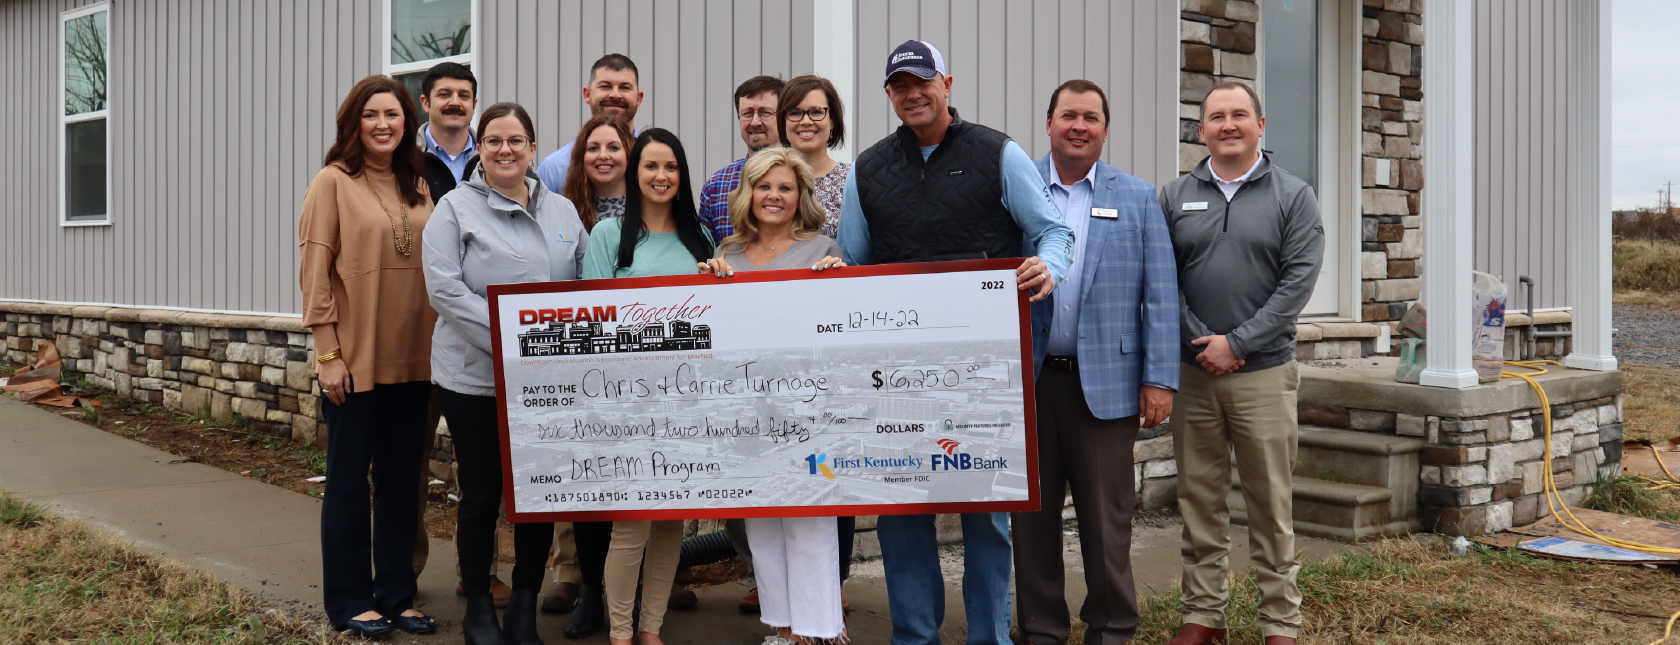 DREAM Check Presentation Held for Chris & Carrie Turnage